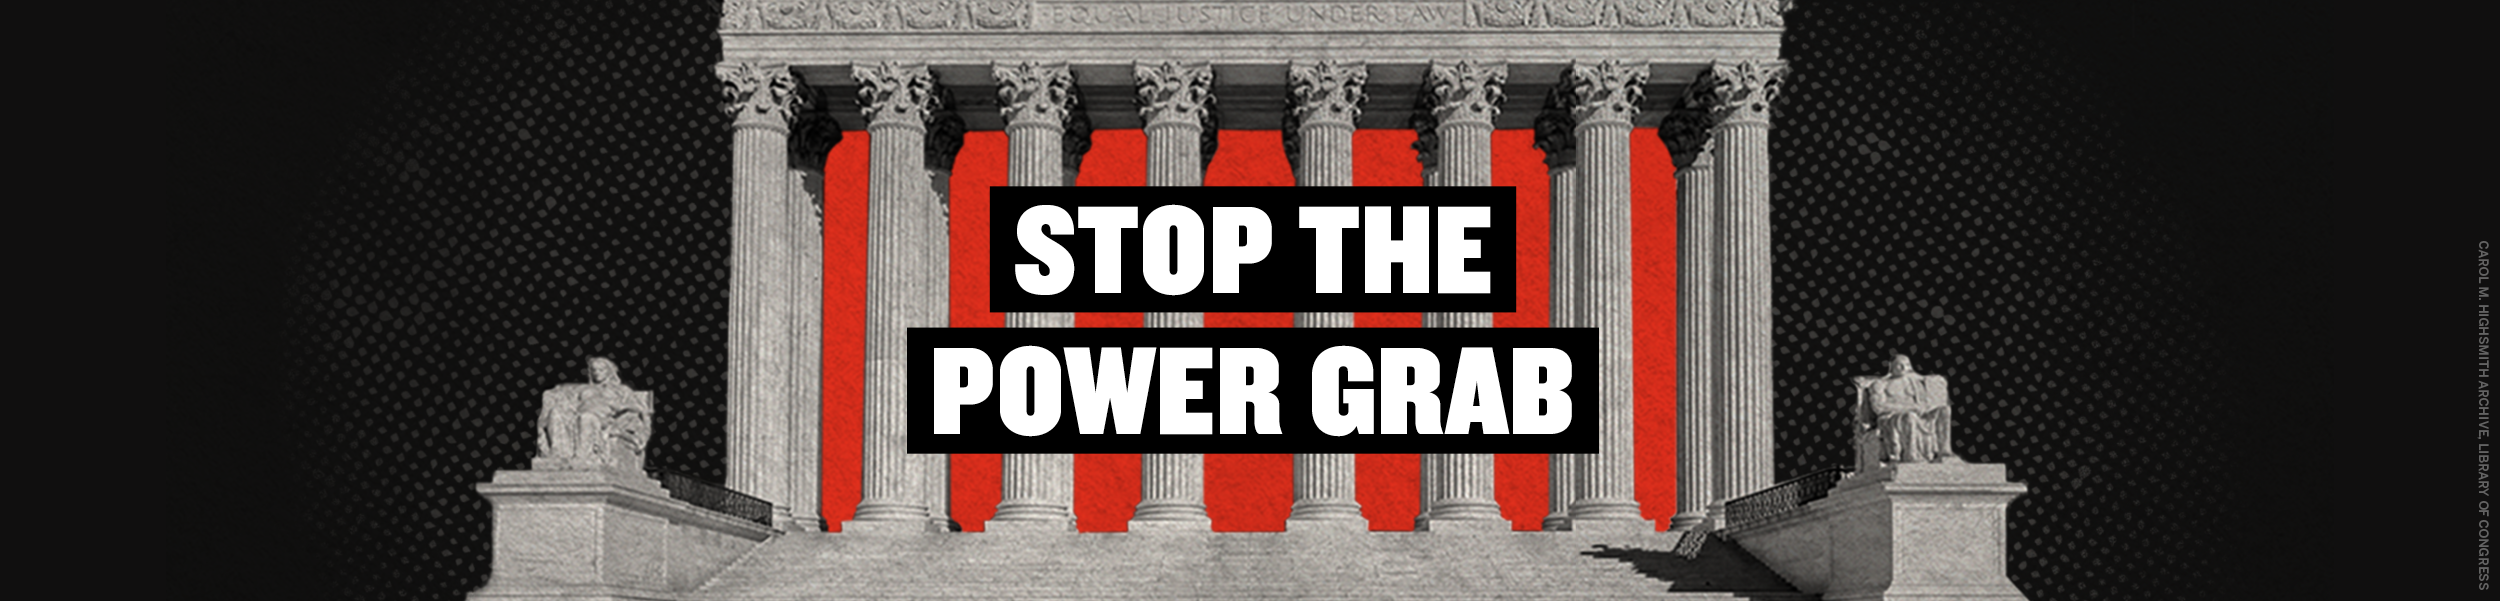 Brennan Center for Justice - Stop The Power Grab